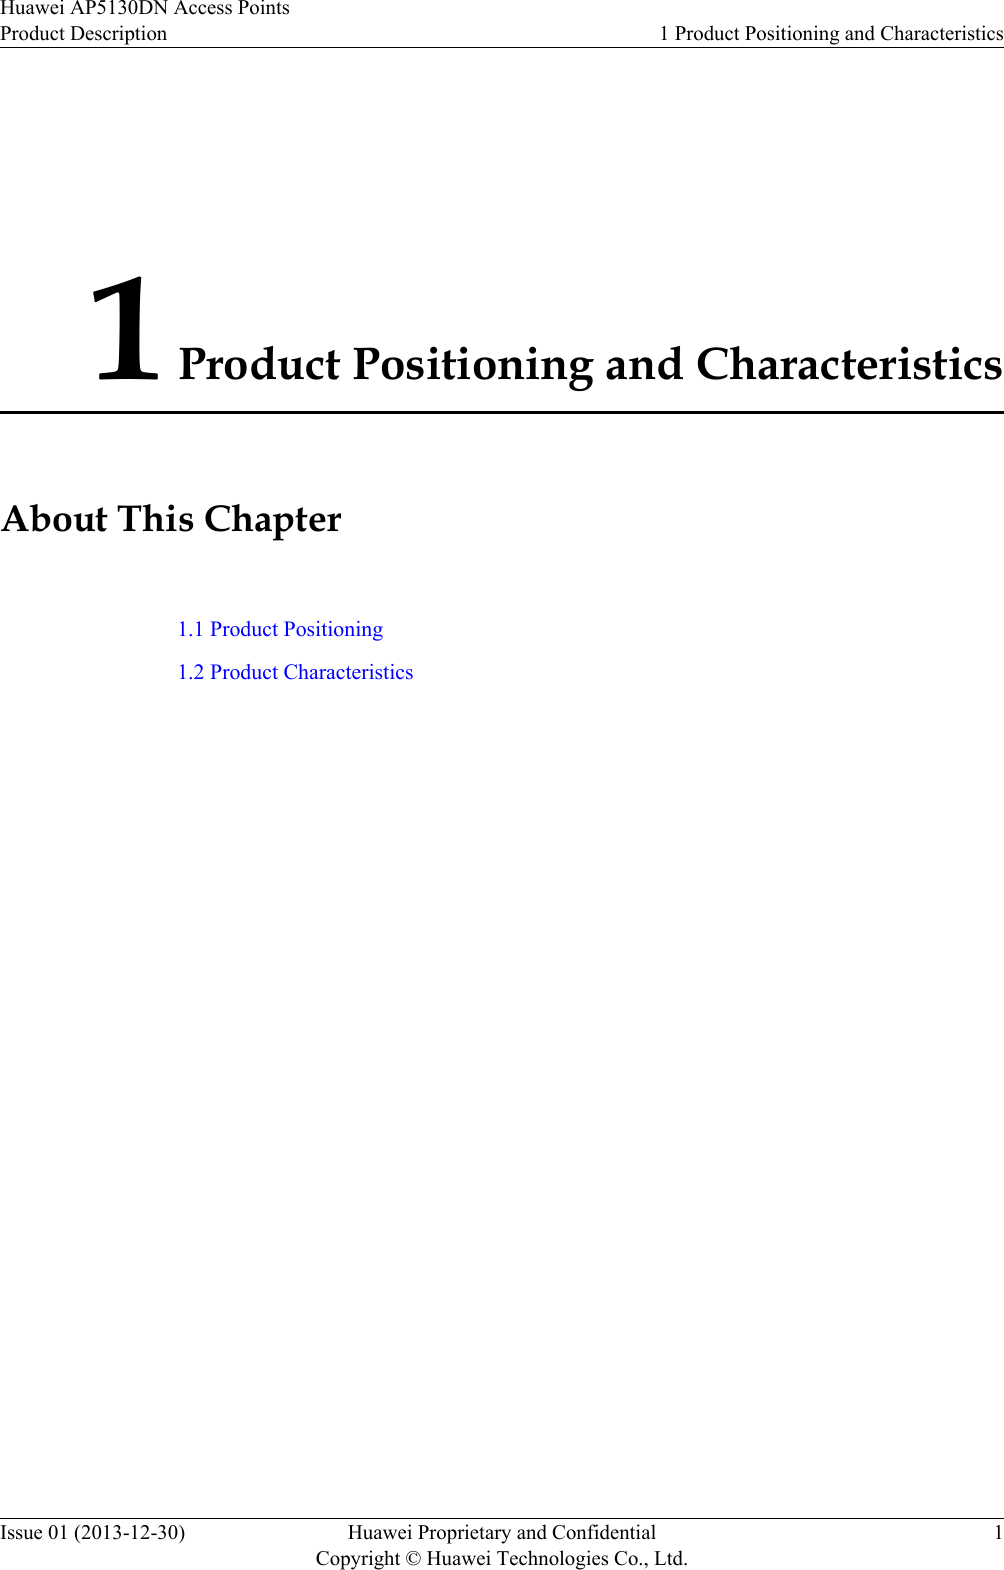 1 Product Positioning and CharacteristicsAbout This Chapter1.1 Product Positioning1.2 Product CharacteristicsHuawei AP5130DN Access PointsProduct Description 1 Product Positioning and CharacteristicsIssue 01 (2013-12-30) Huawei Proprietary and ConfidentialCopyright © Huawei Technologies Co., Ltd.1